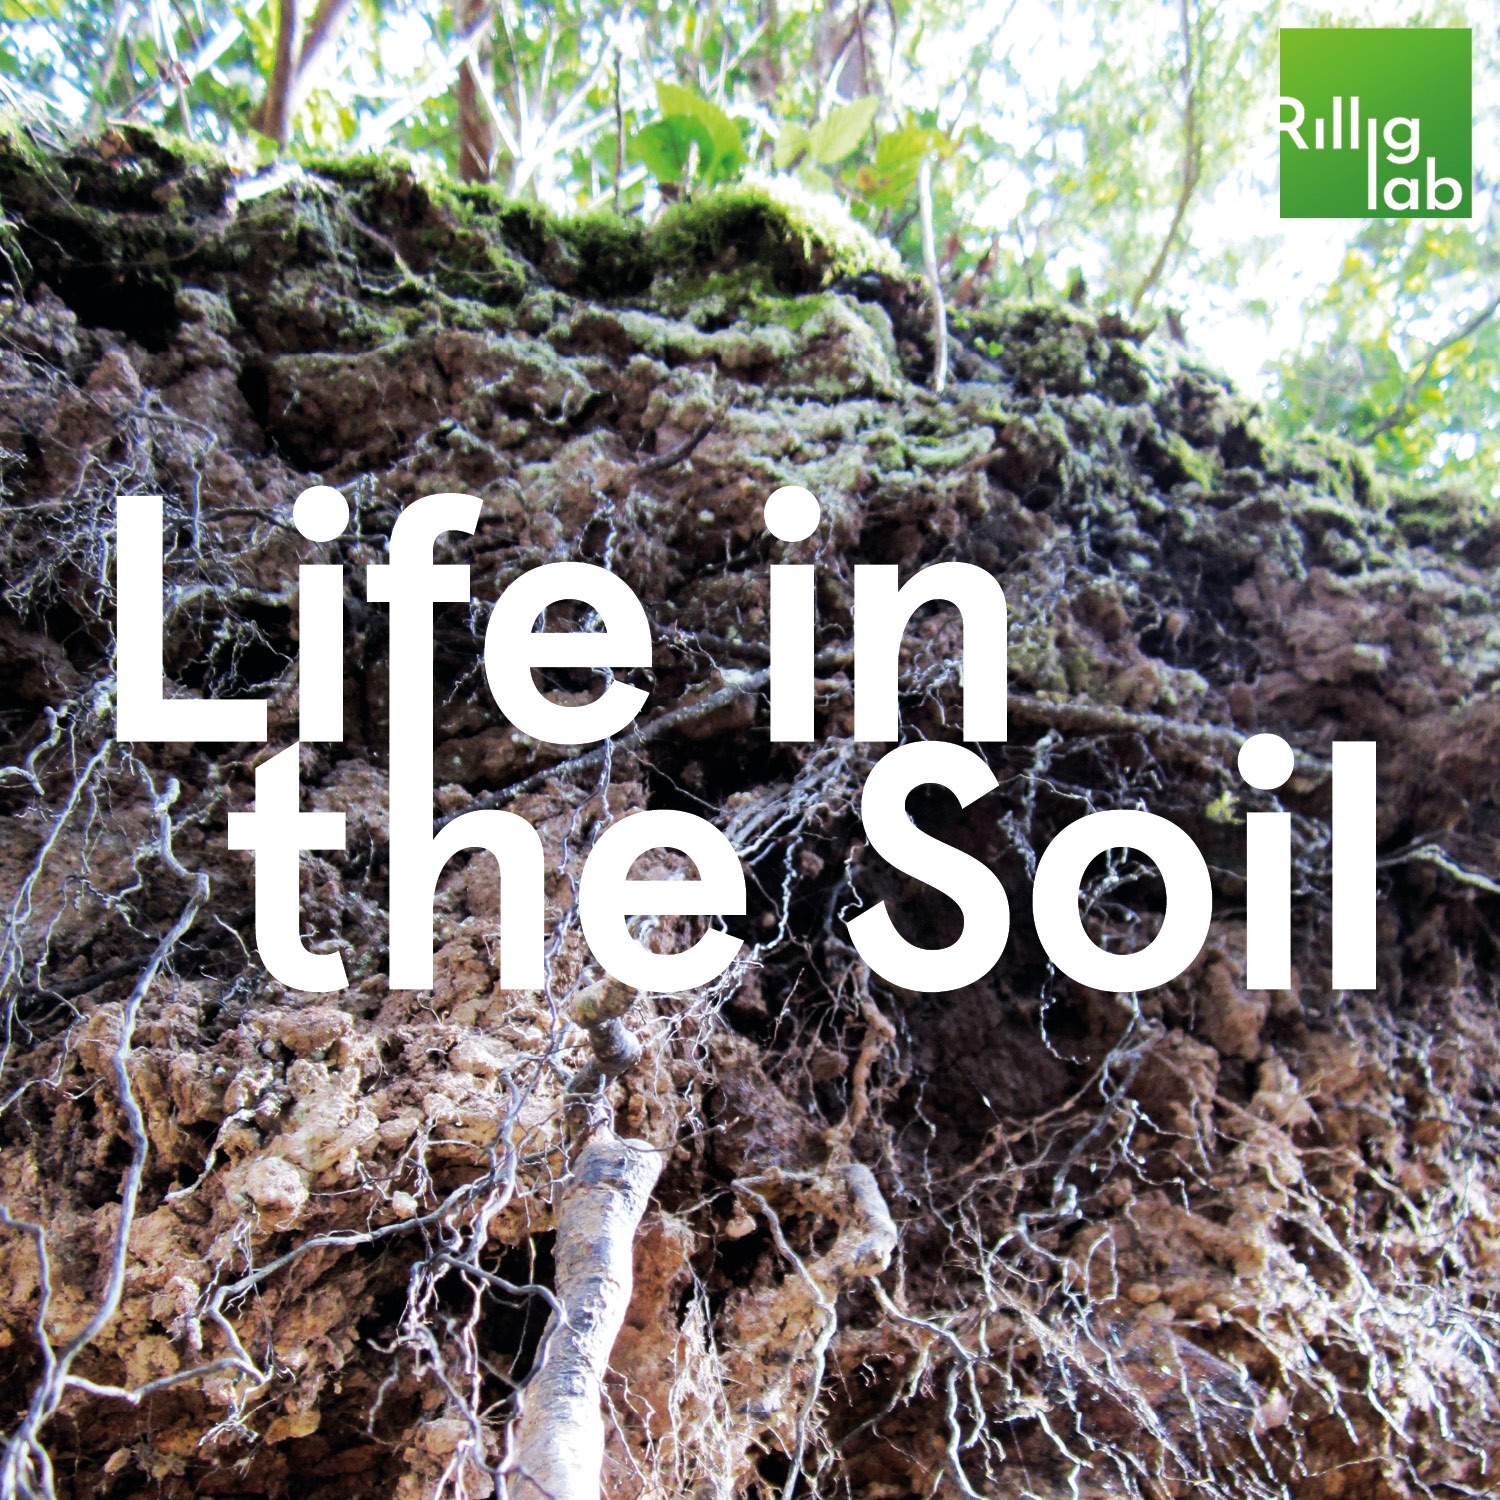 Soil and Global Change - The Multiple Impacts of Human Action